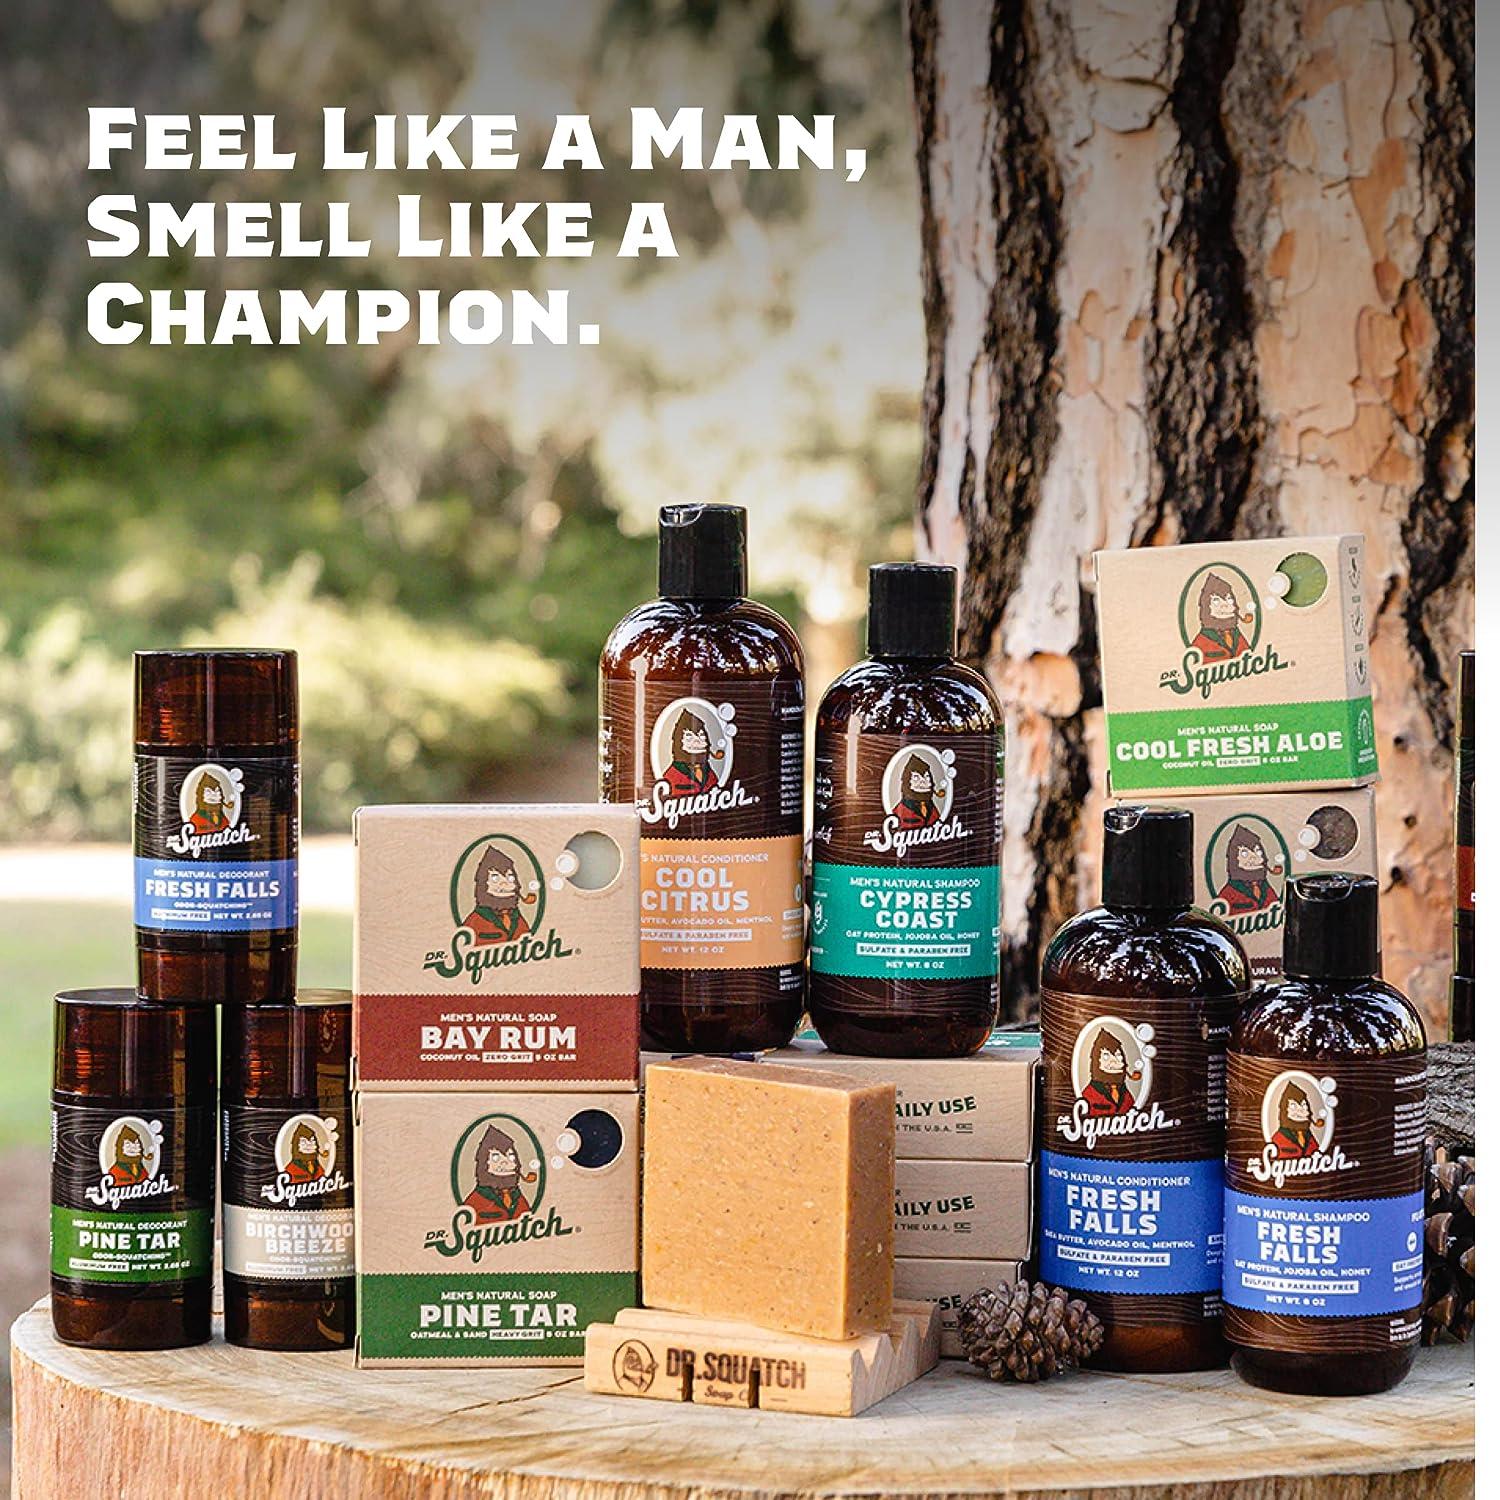 Dr. Squatch Men's Cologne and Natural Bar Soap - Fireside Bourbon Natural  Cologne and Wood Barrel Bourbon and Bay Rum Men's Bar Soap - Smell like  spices bourbon and oak - Natural